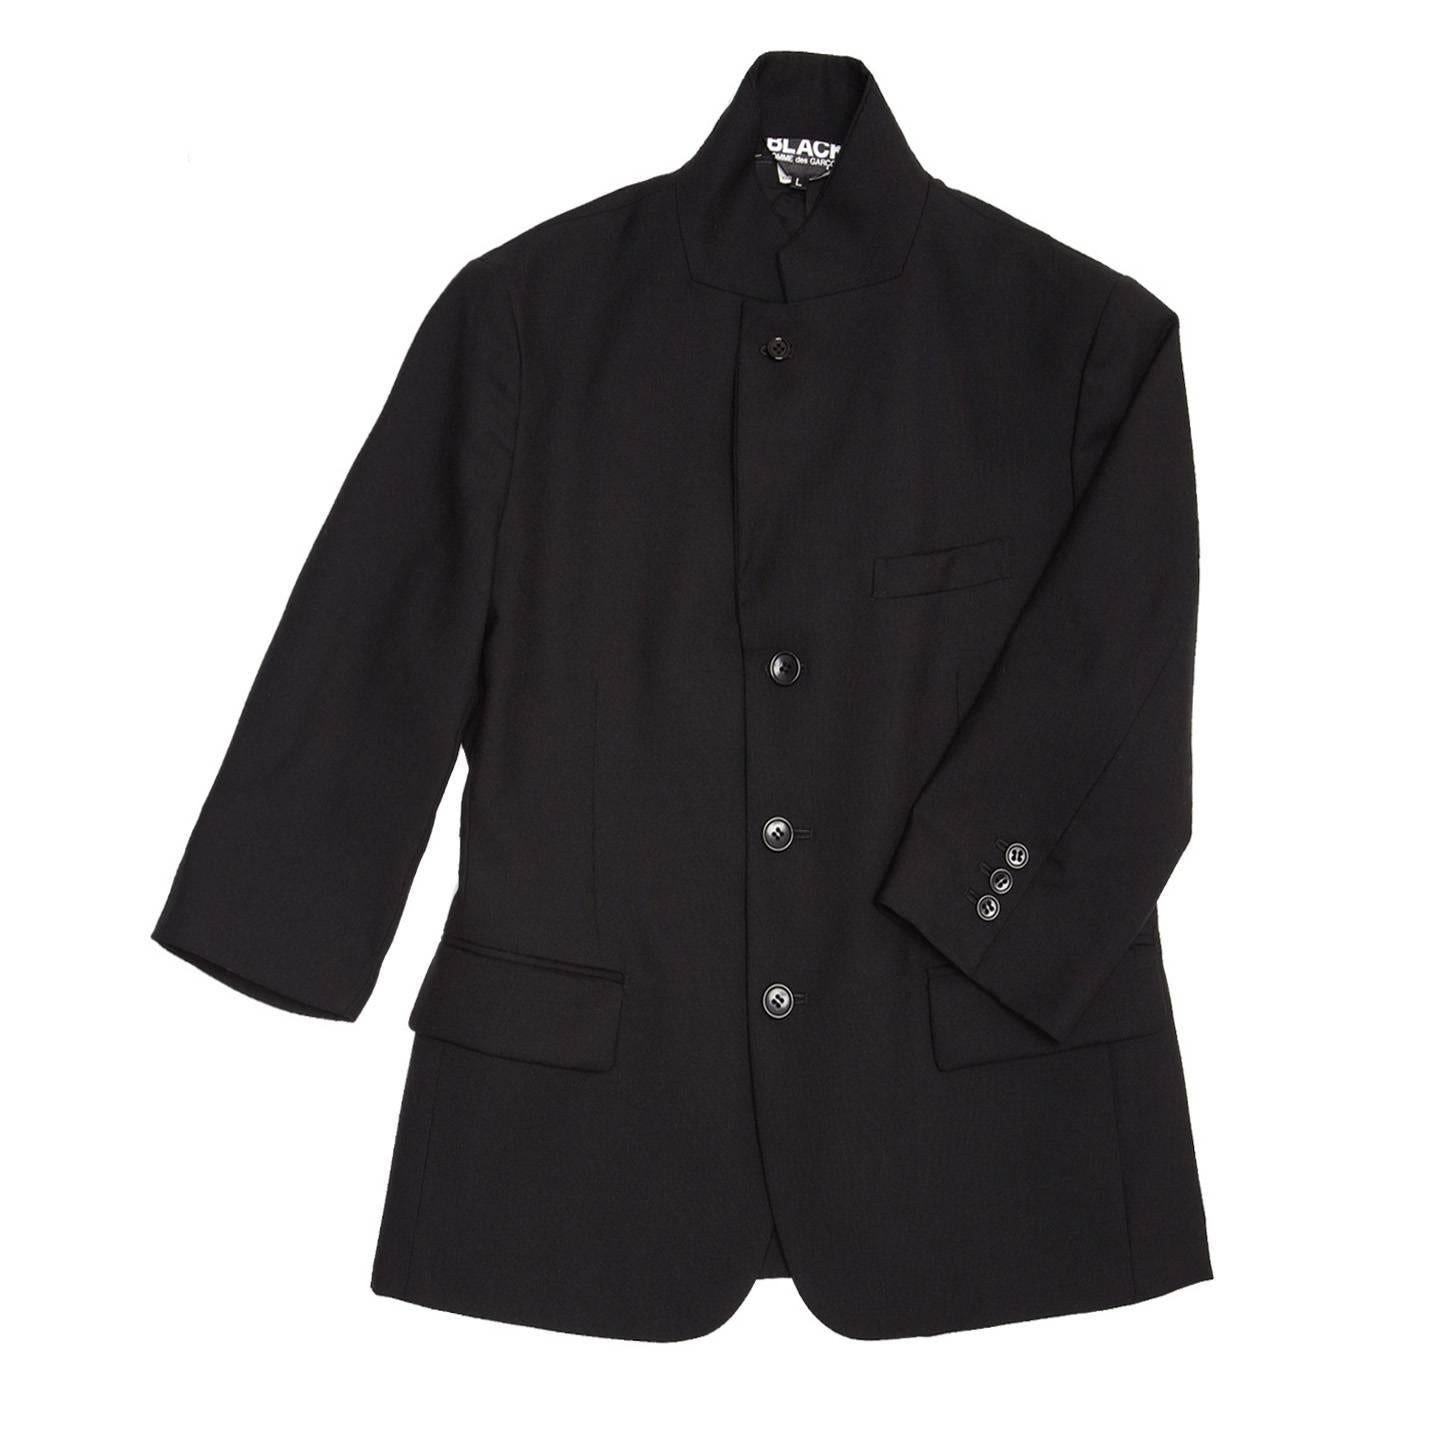 Black wool 3 buttons blazer with small lapel that can be worn standing up as well. The sleeves are 3/4 length, it has a breast pocket and 2 flap pockets at waist and a vent at center back. It is a Japanese size Large - fits as a U.S. size